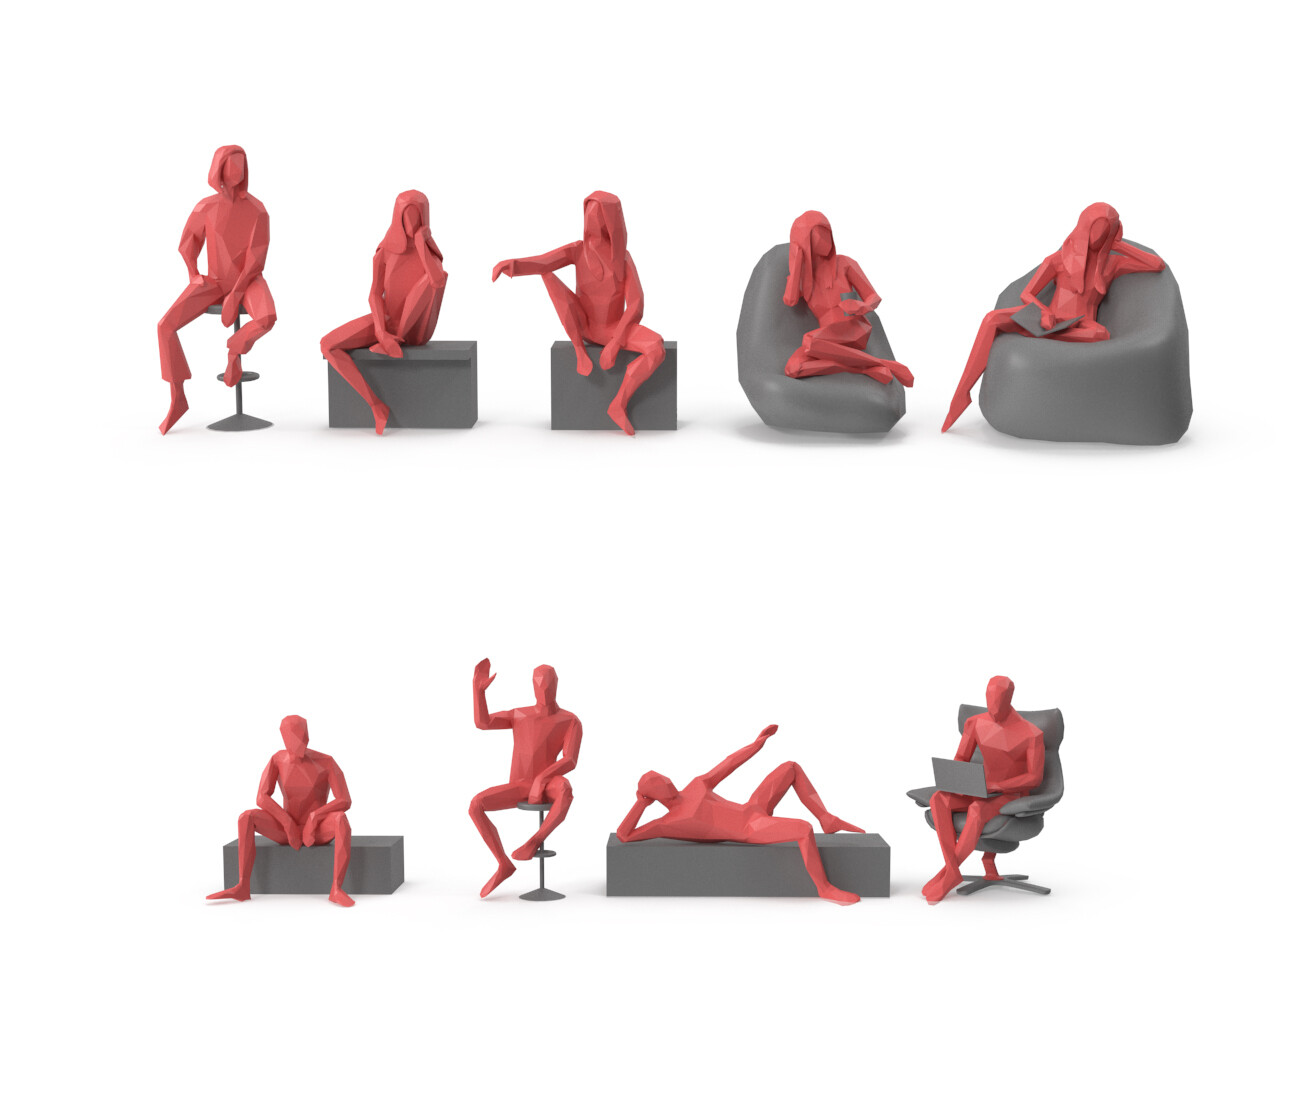 Low Poly Posed People Pack 22 - Relax Sitting